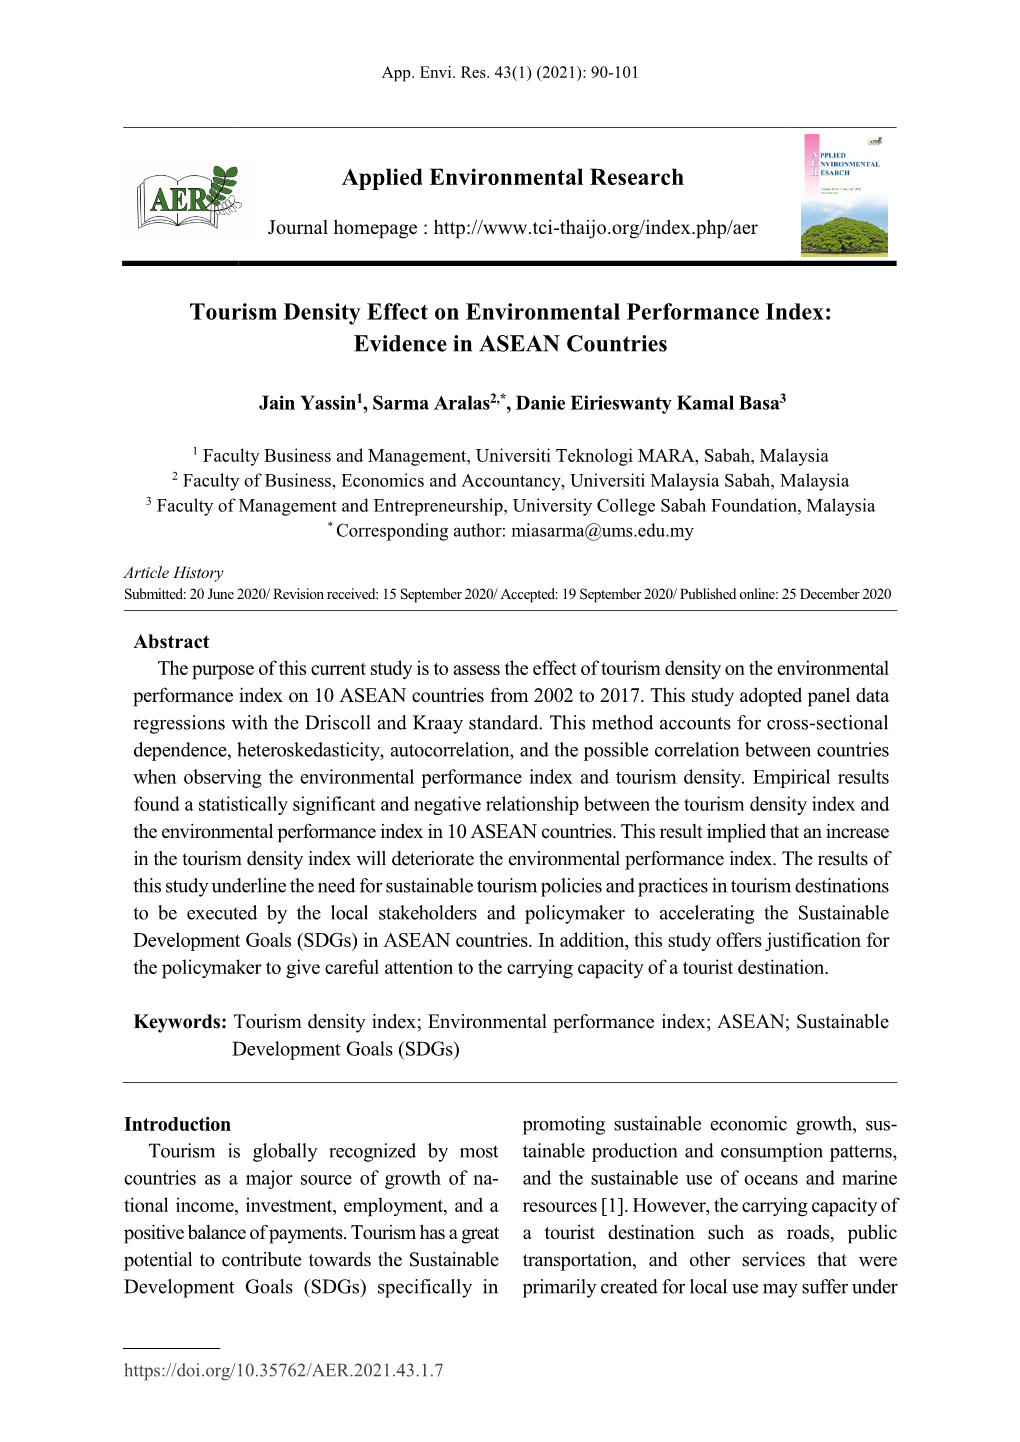 Tourism Density Effect on Environmental Performance Index: Evidence in ASEAN Countries